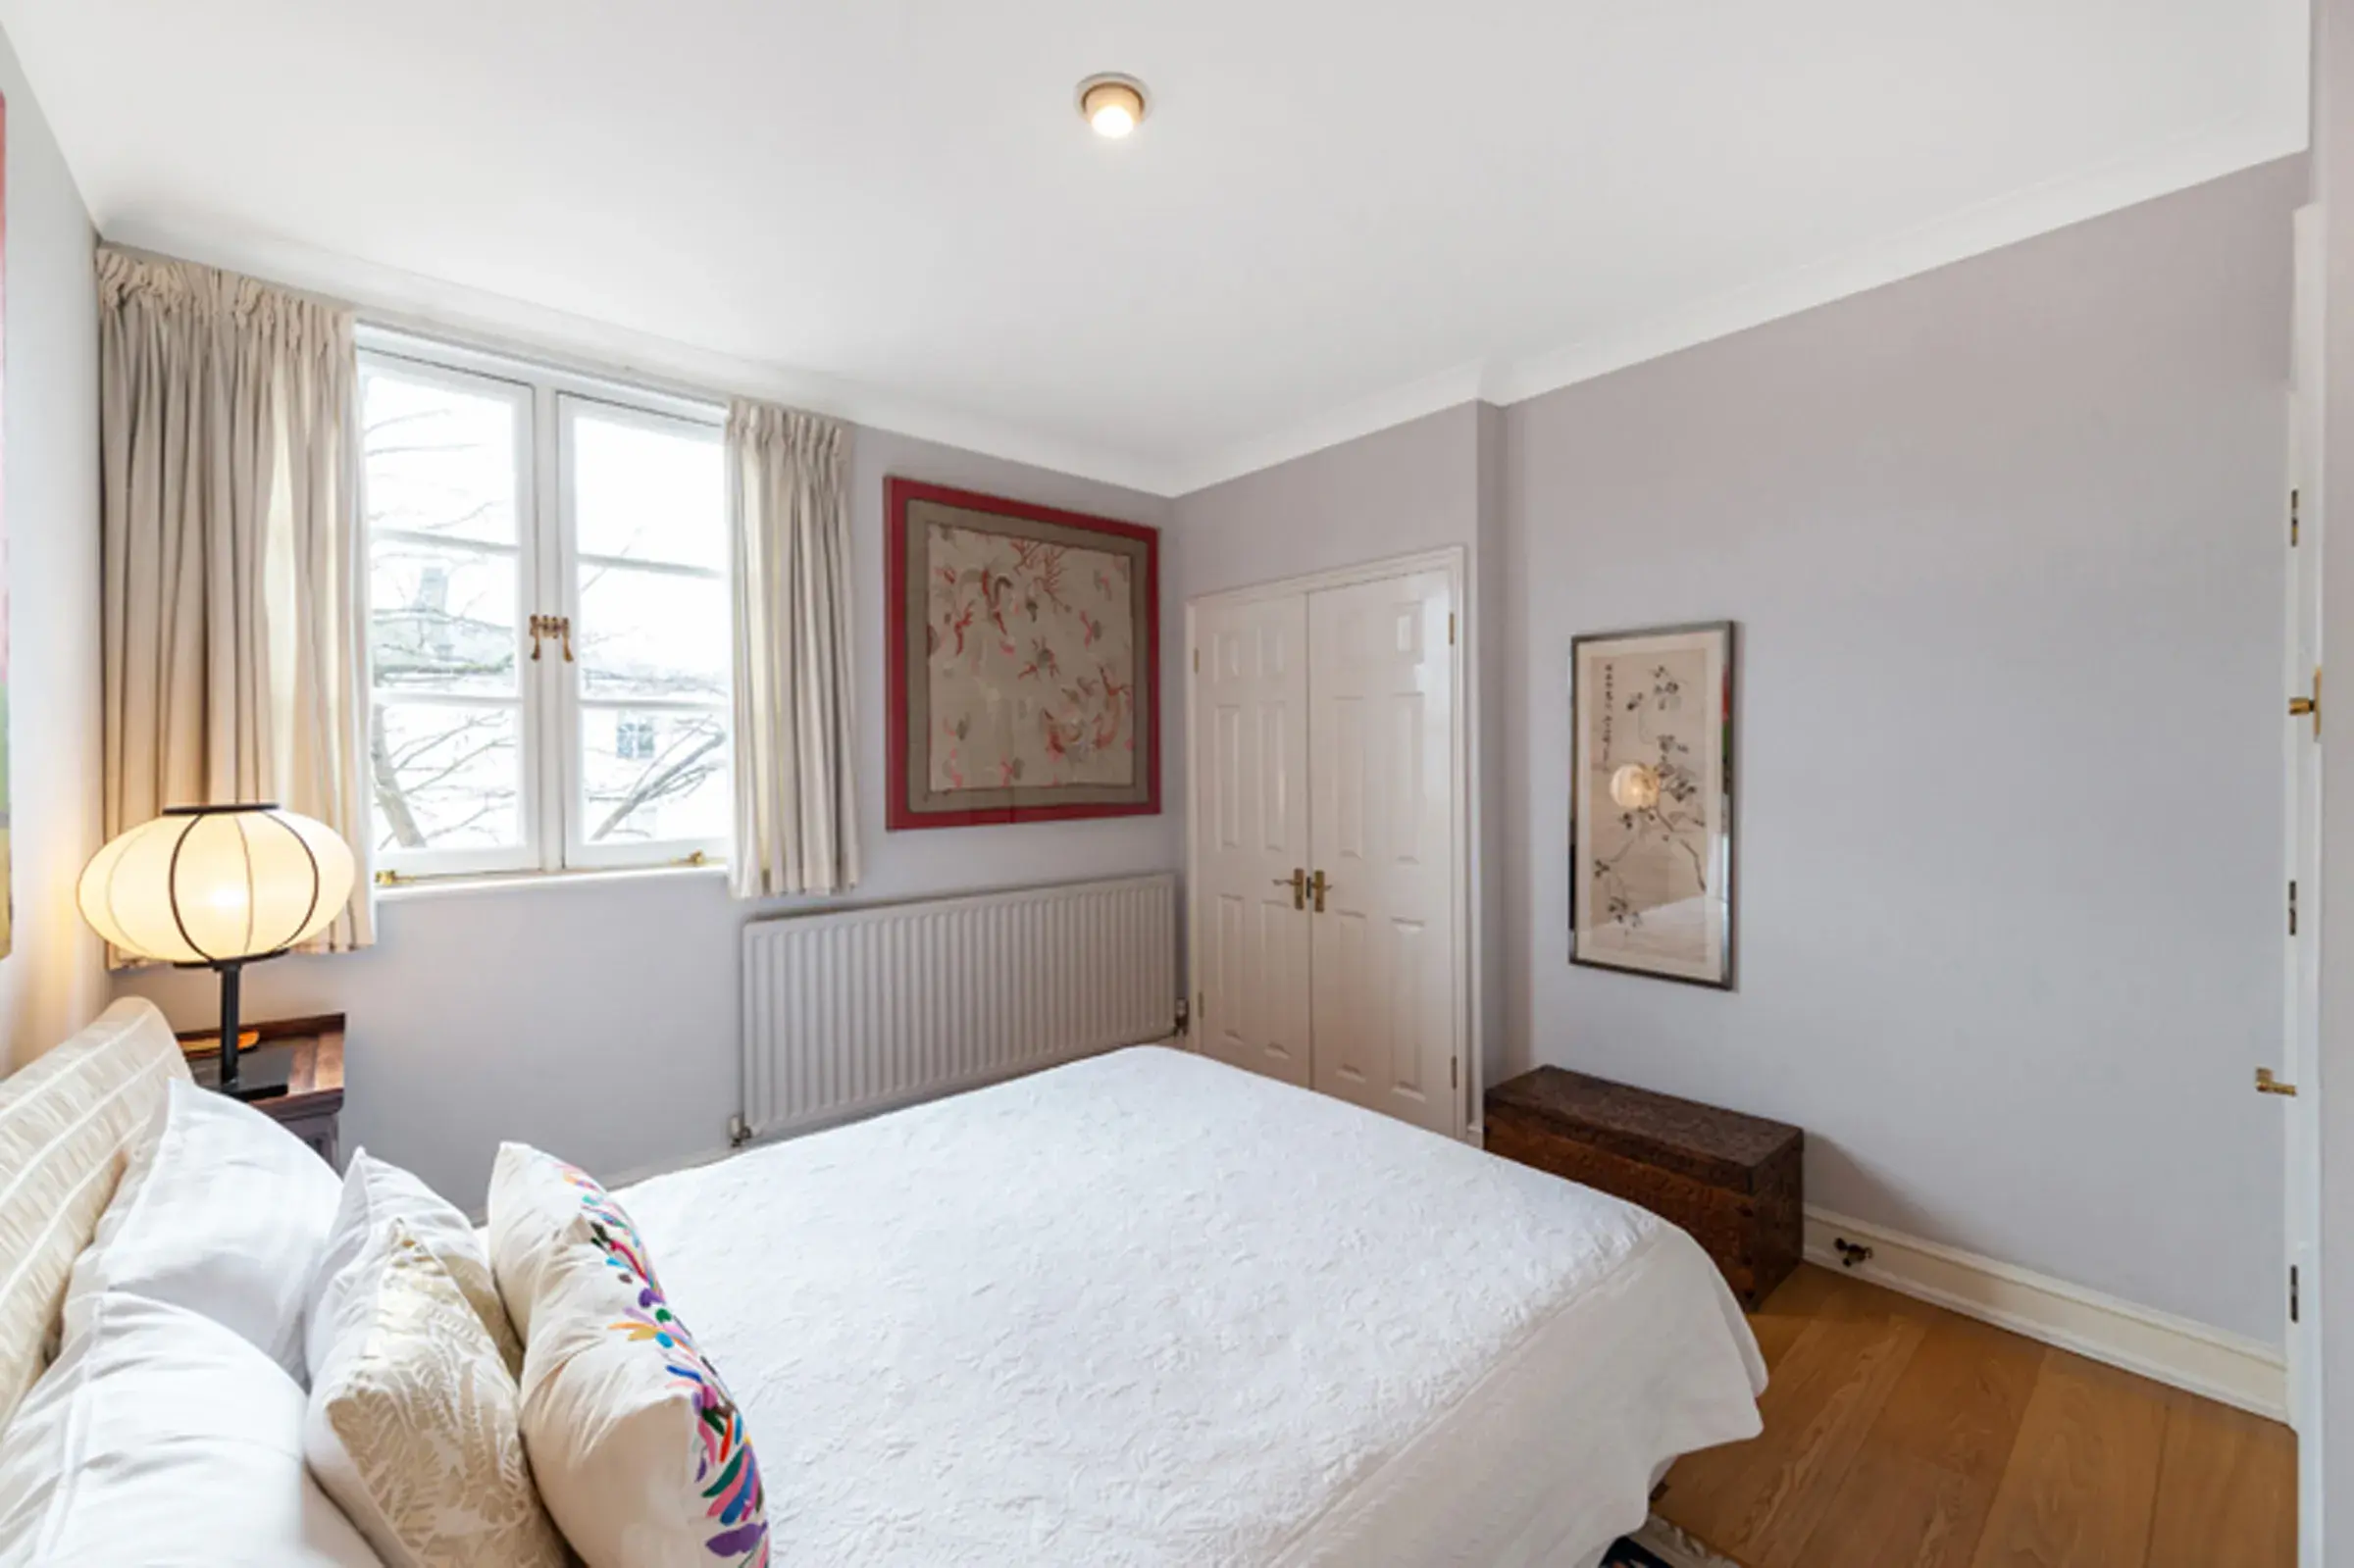 Notting Hill 2, holiday home in Notting Hill, London